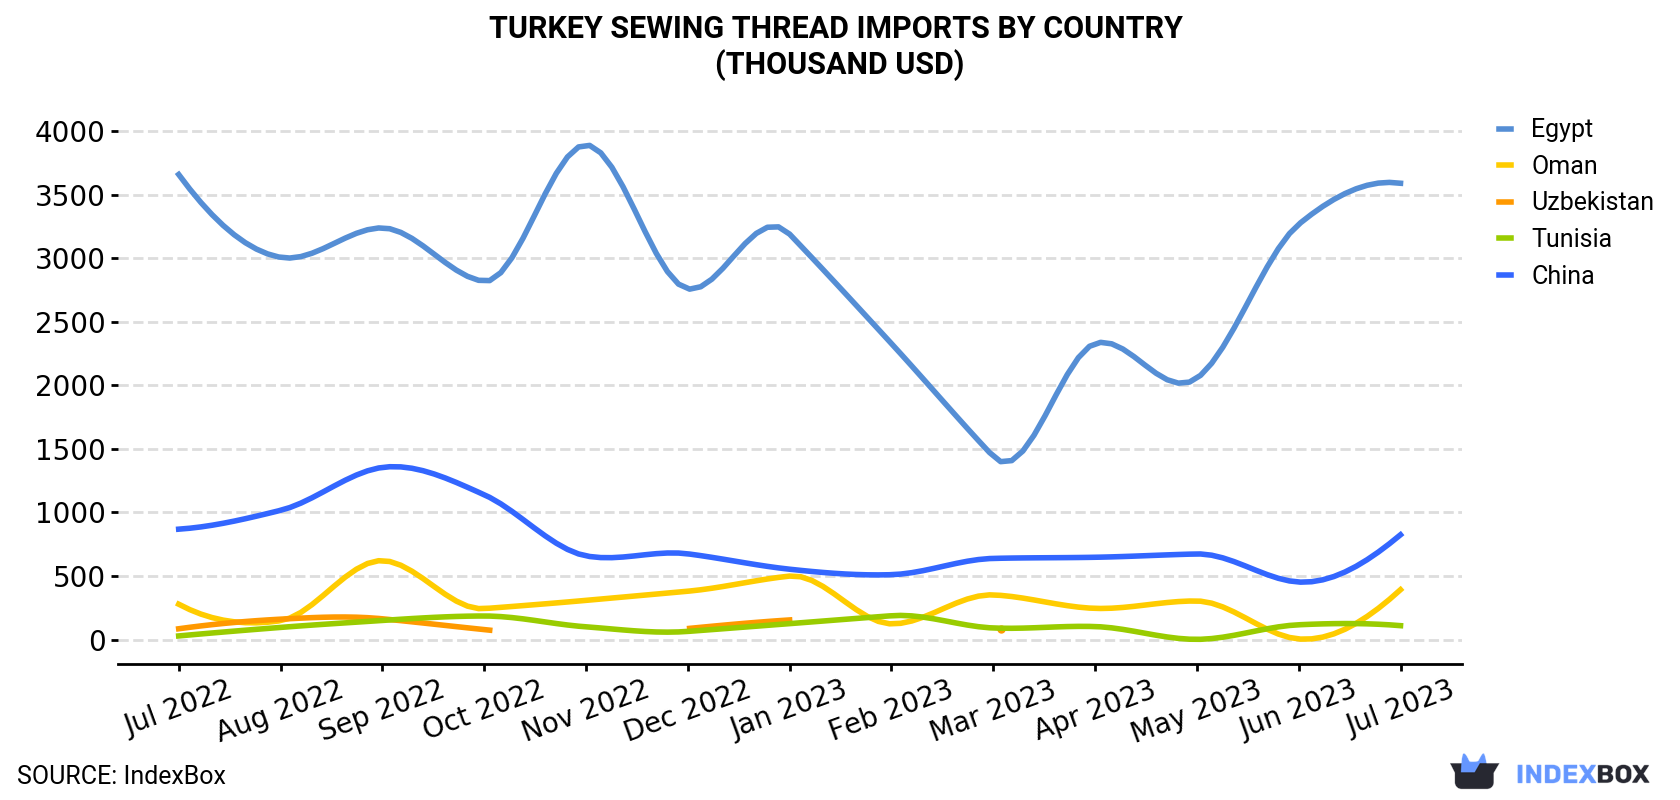 Turkey Sewing Thread Imports By Country (Thousand USD)